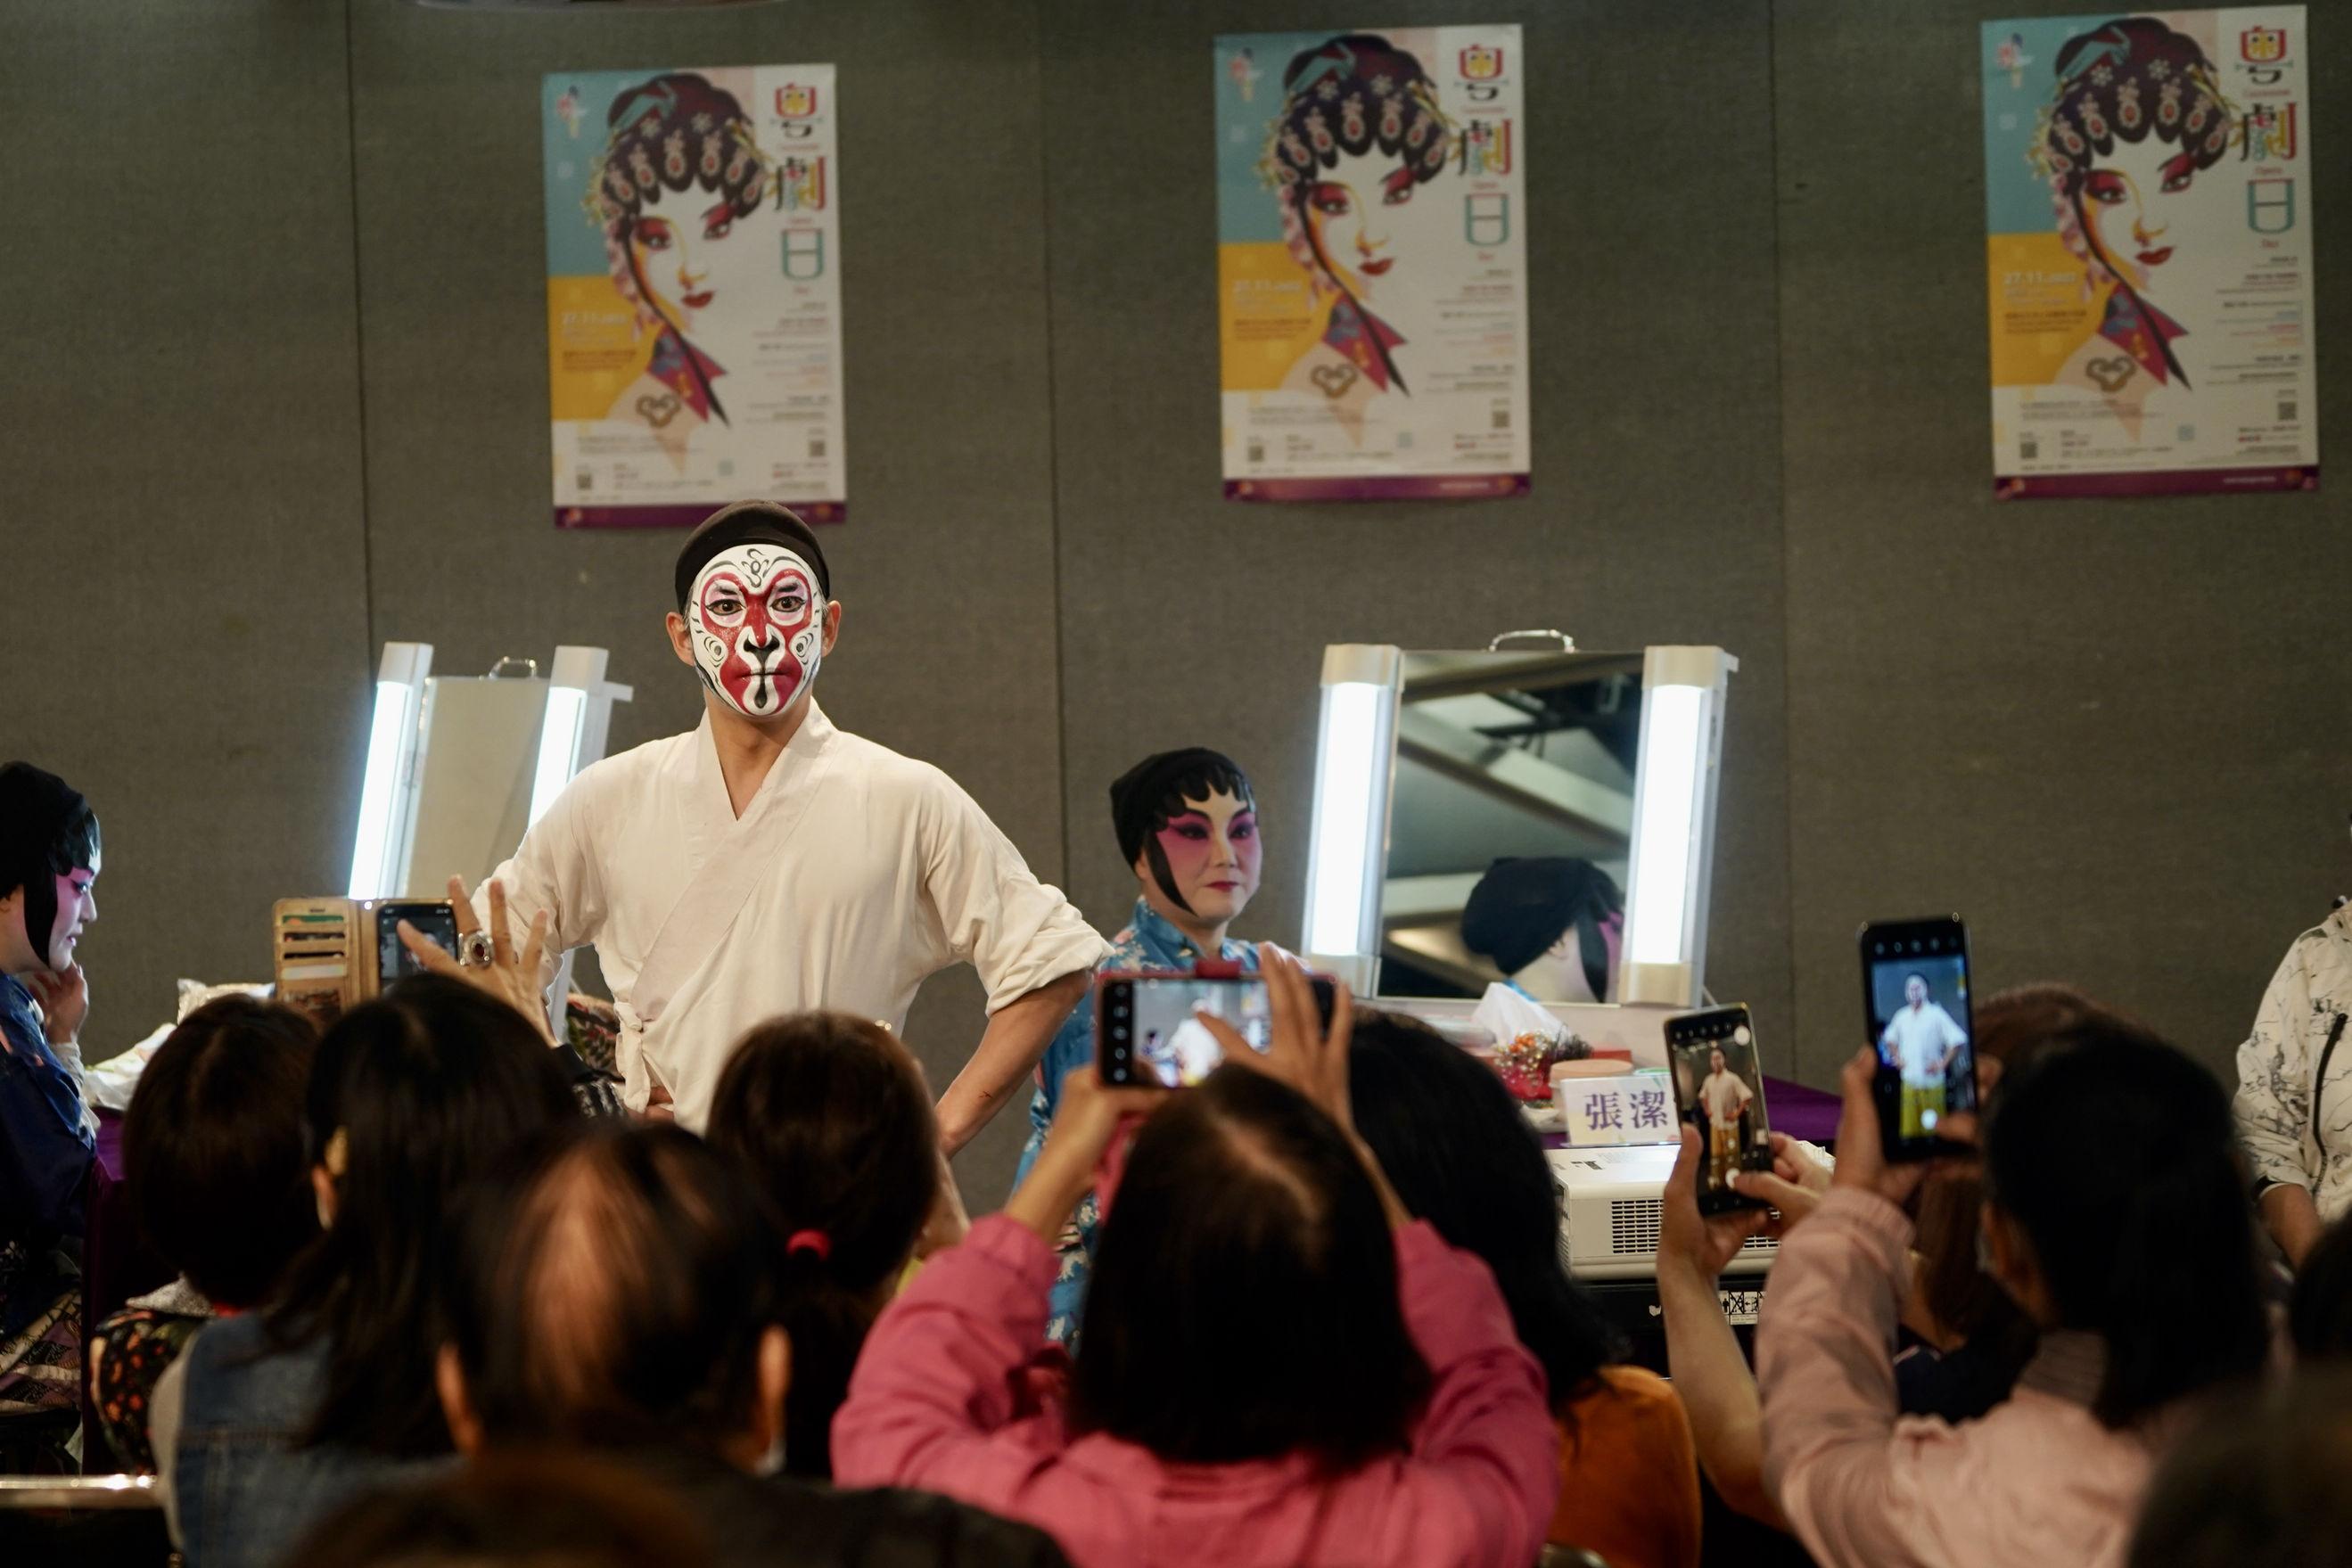 The annual Cantonese Opera Day, presented by the Leisure and Cultural Services Department, celebrated its 20th anniversary today (November 27) with an array of free activities. Photo shows Cantonese opera performers demonstrating make-up skills to the audiences.